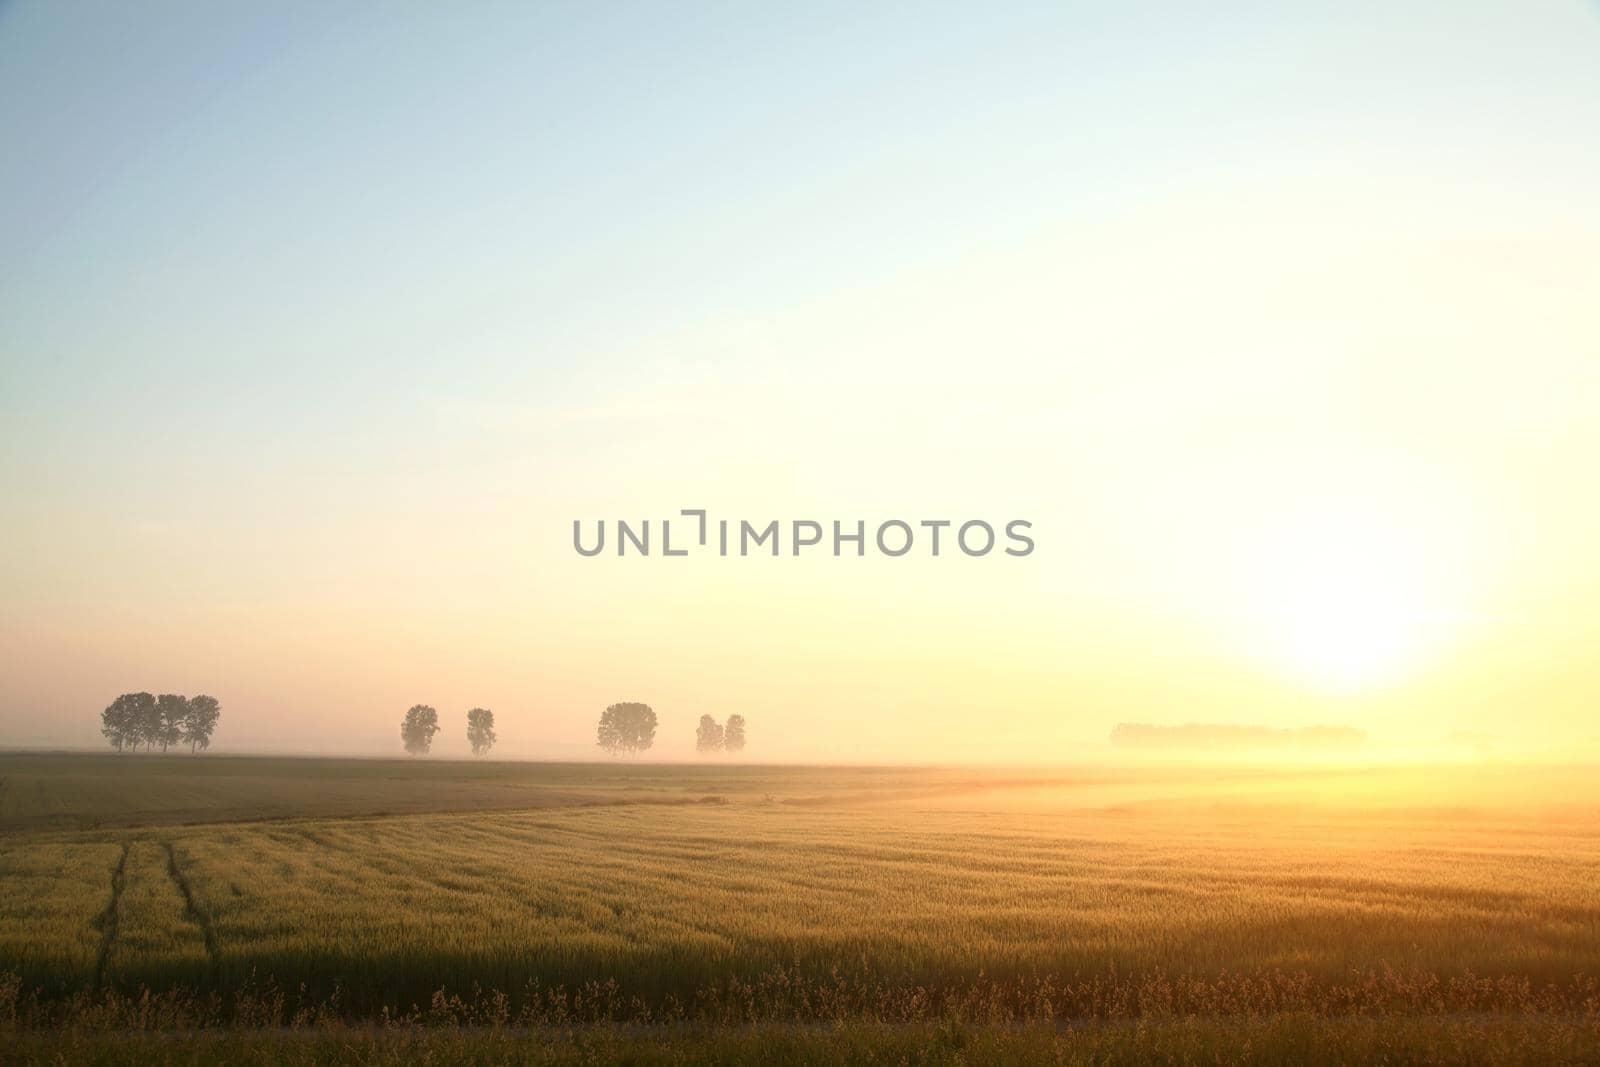 Sunrise over a field of grain in foggy weather.